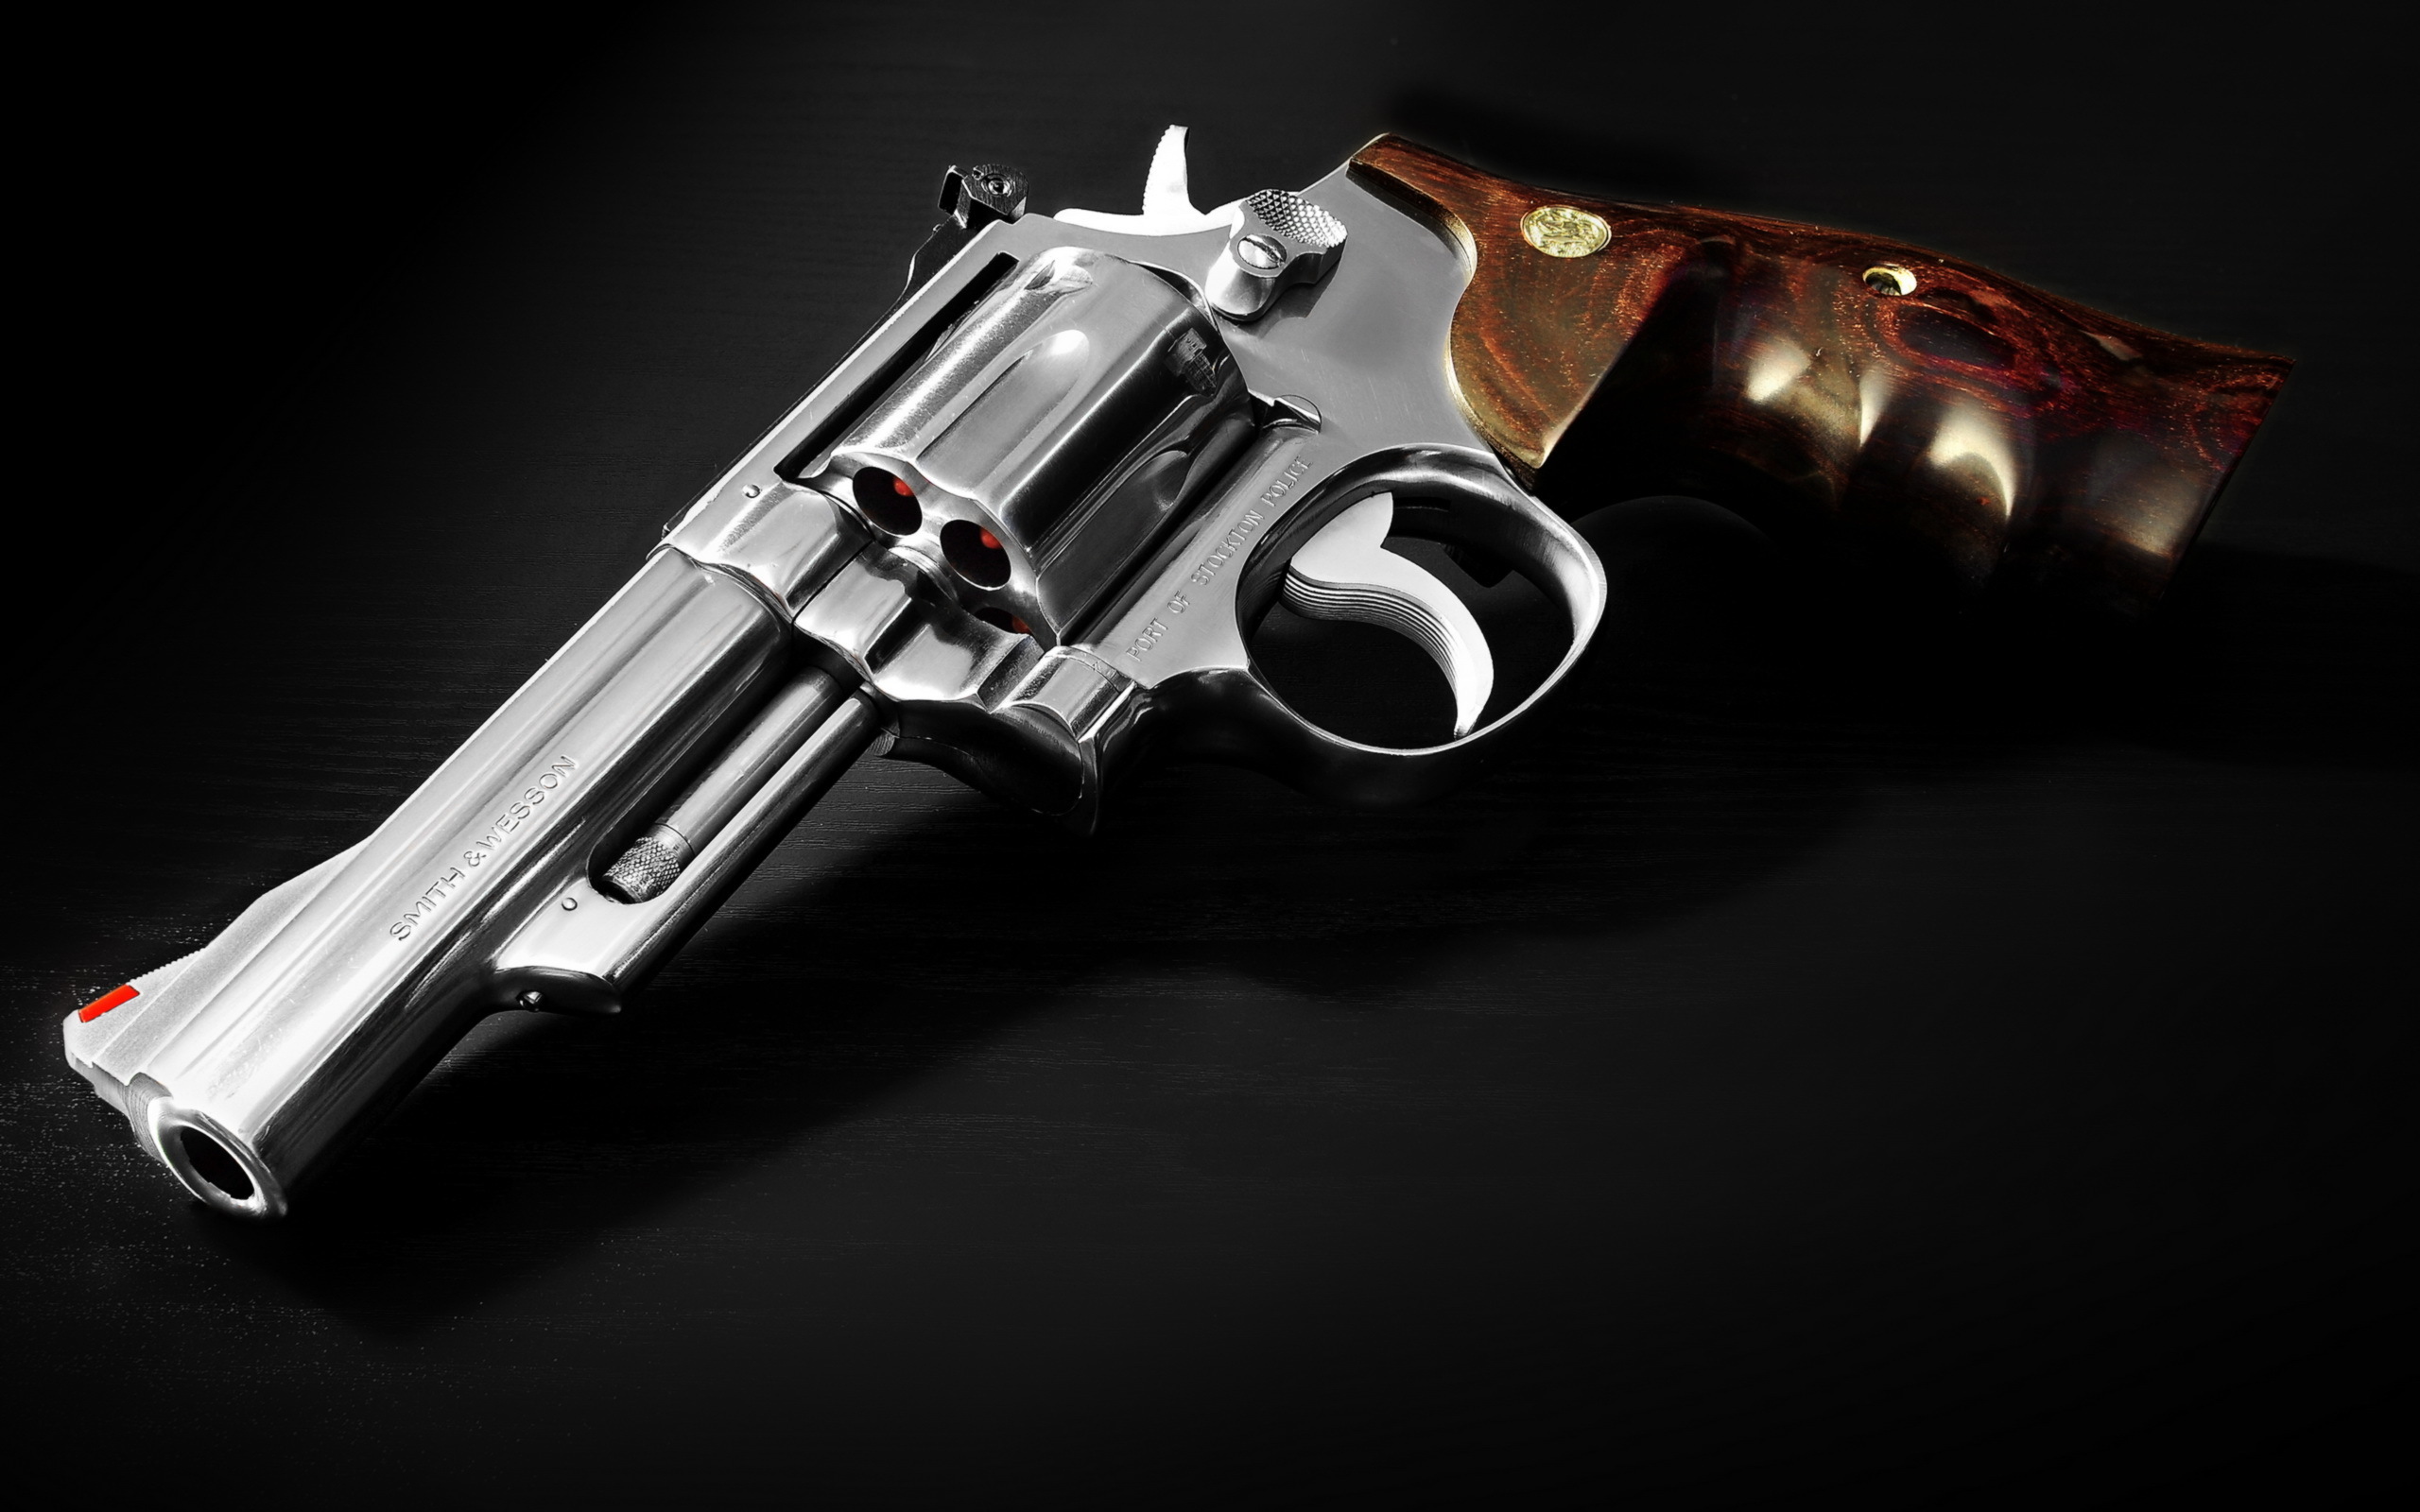 Smith And Wesson Puter Wallpaper Desktop Background